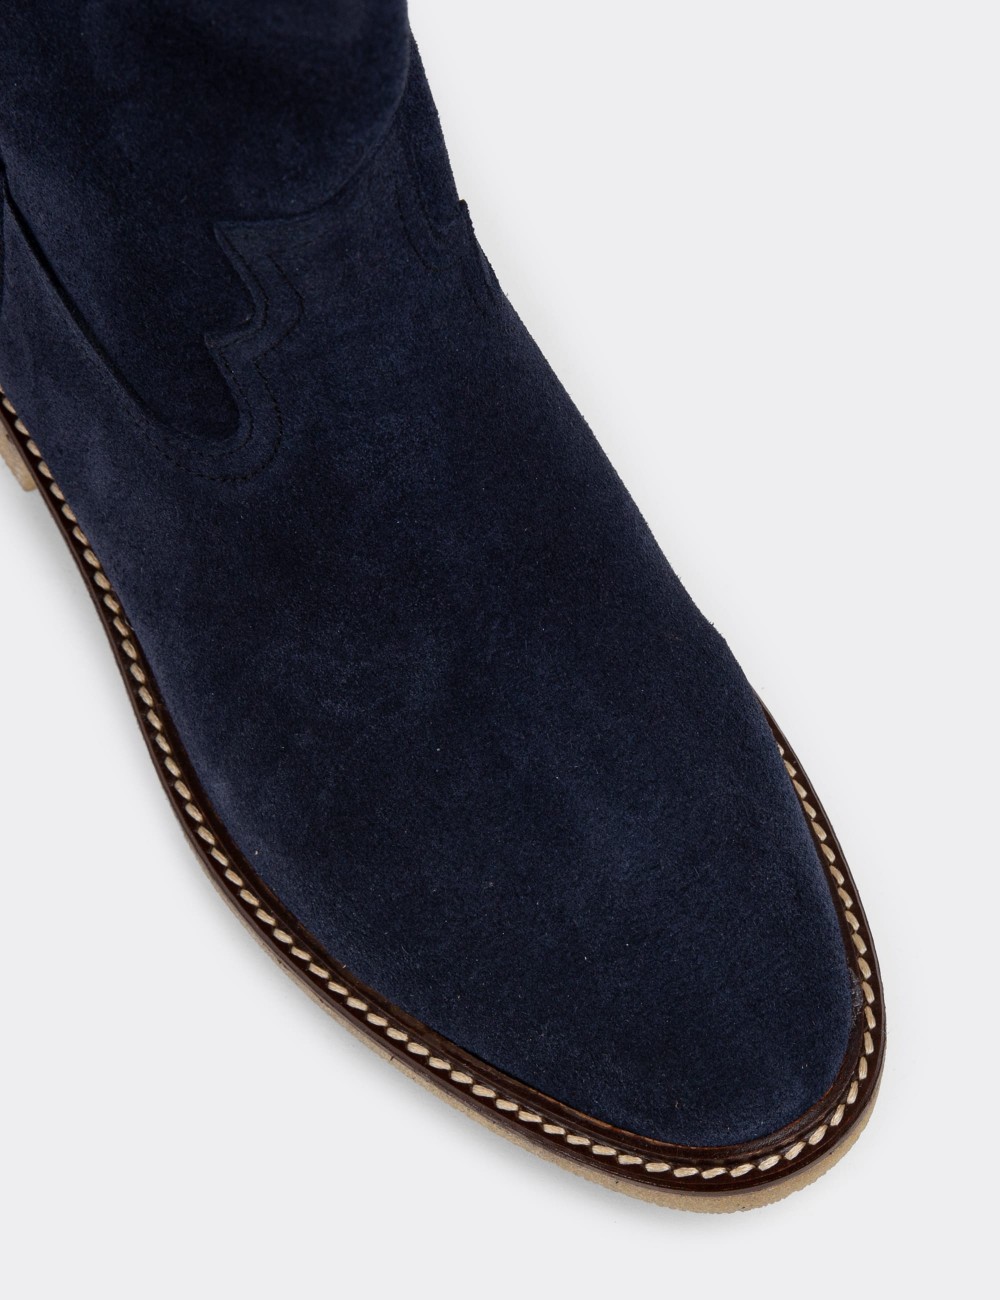 Navy Suede Leather Boots - 01968ZLCVC01